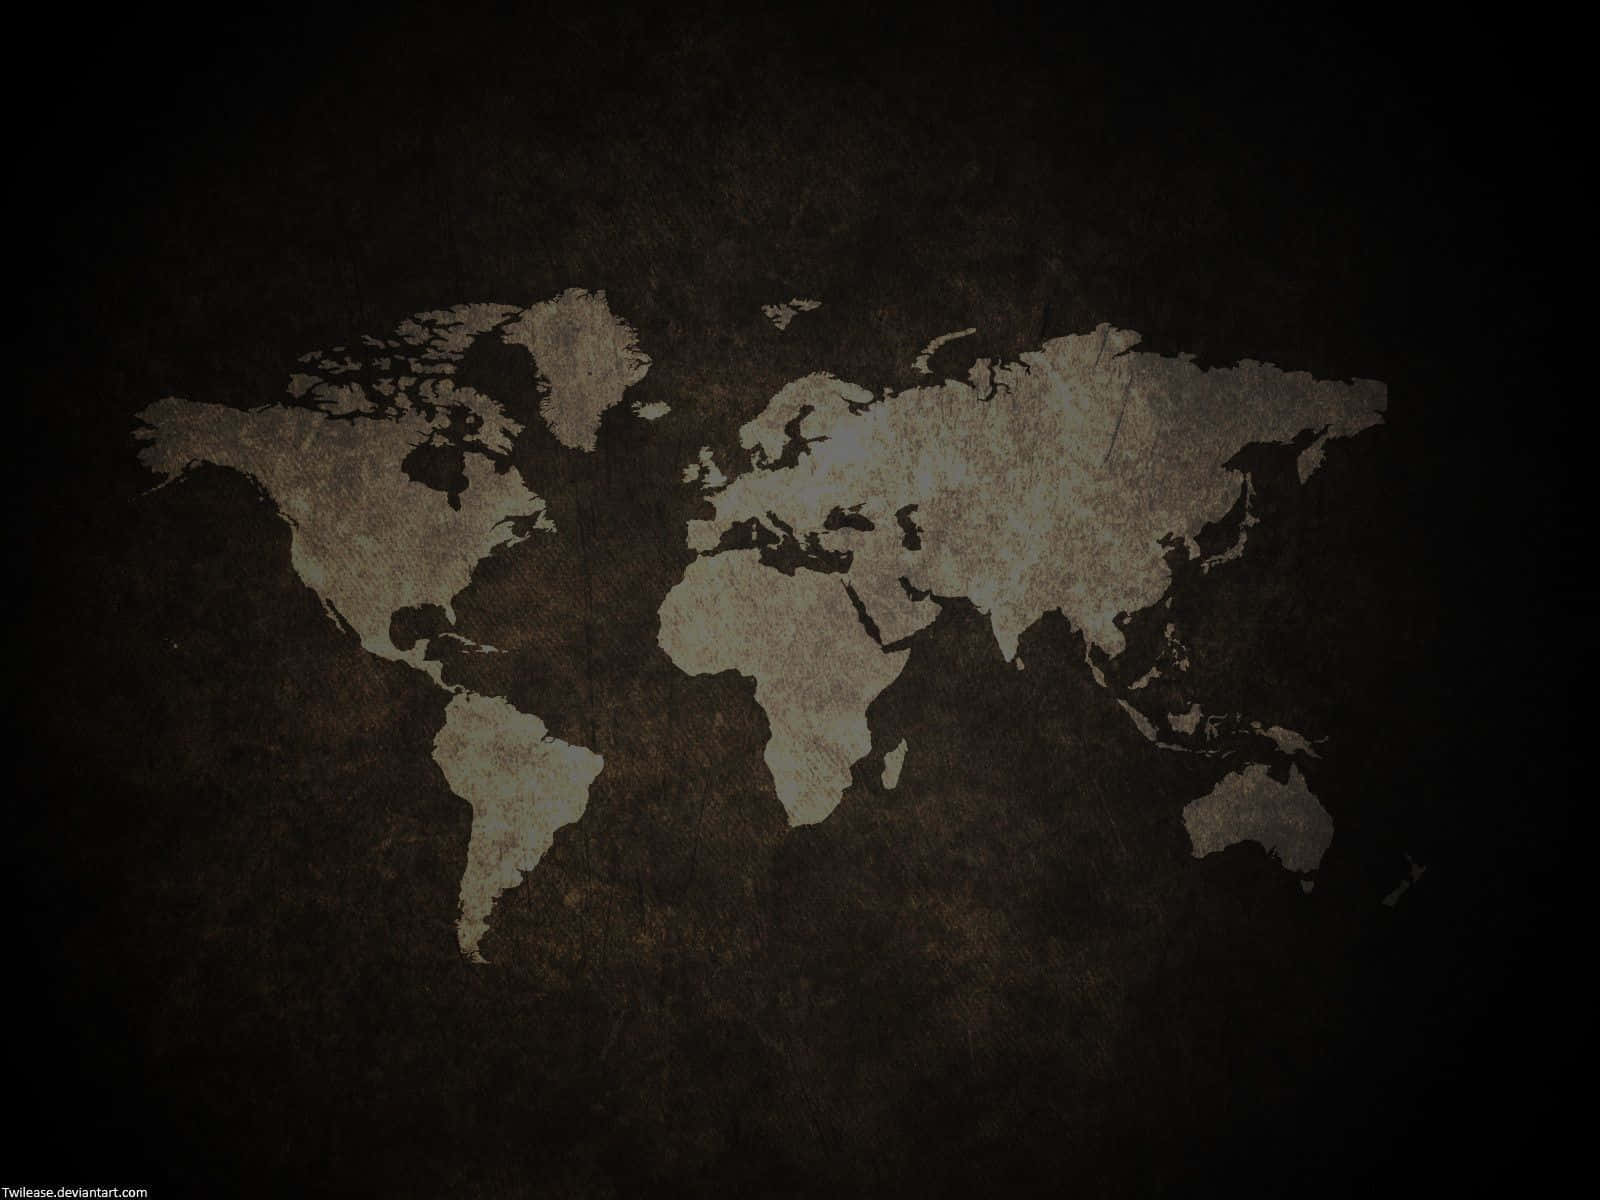 A World Map On A Black Background